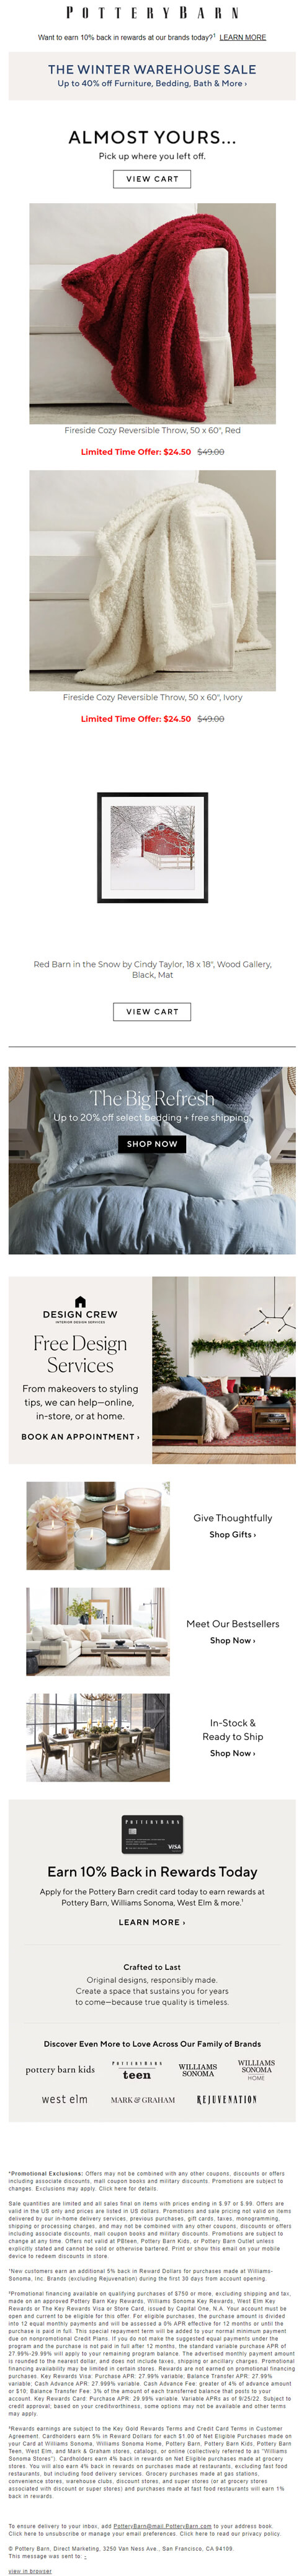 Pottery Barn- cart abandonment email